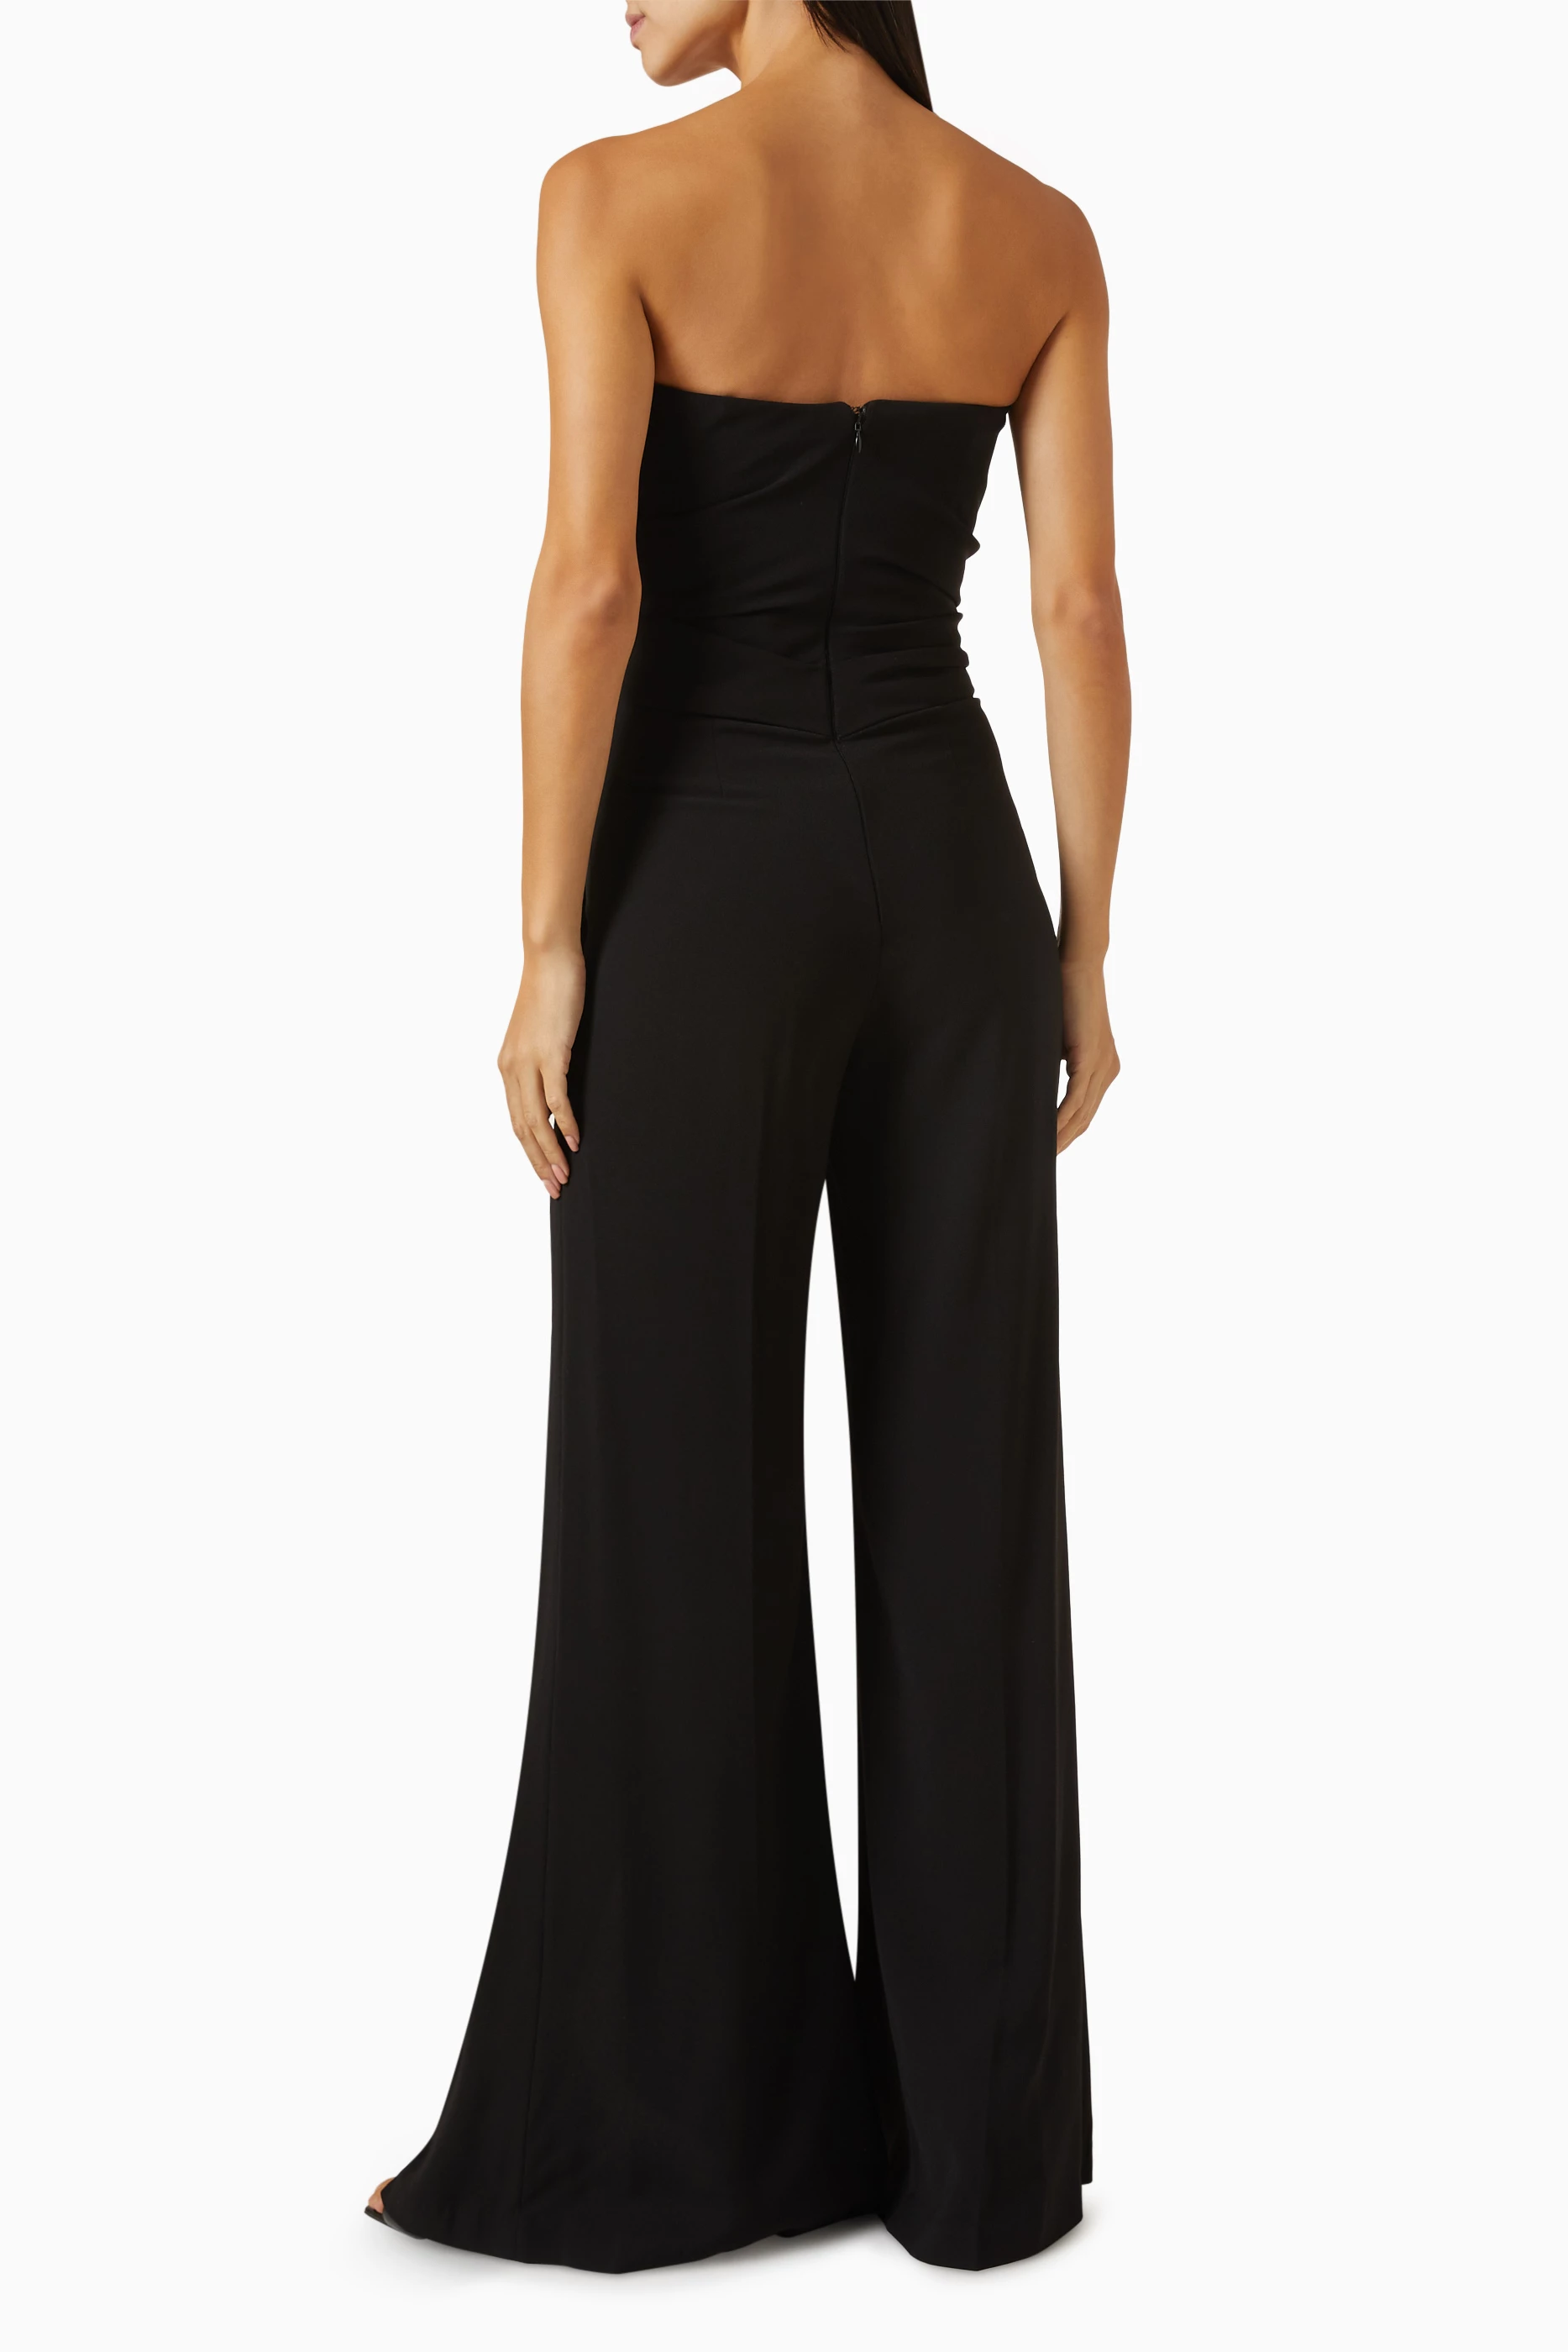 Buy Gemy Maalouf Black Bead-embellished Strapless Jumpsuit in